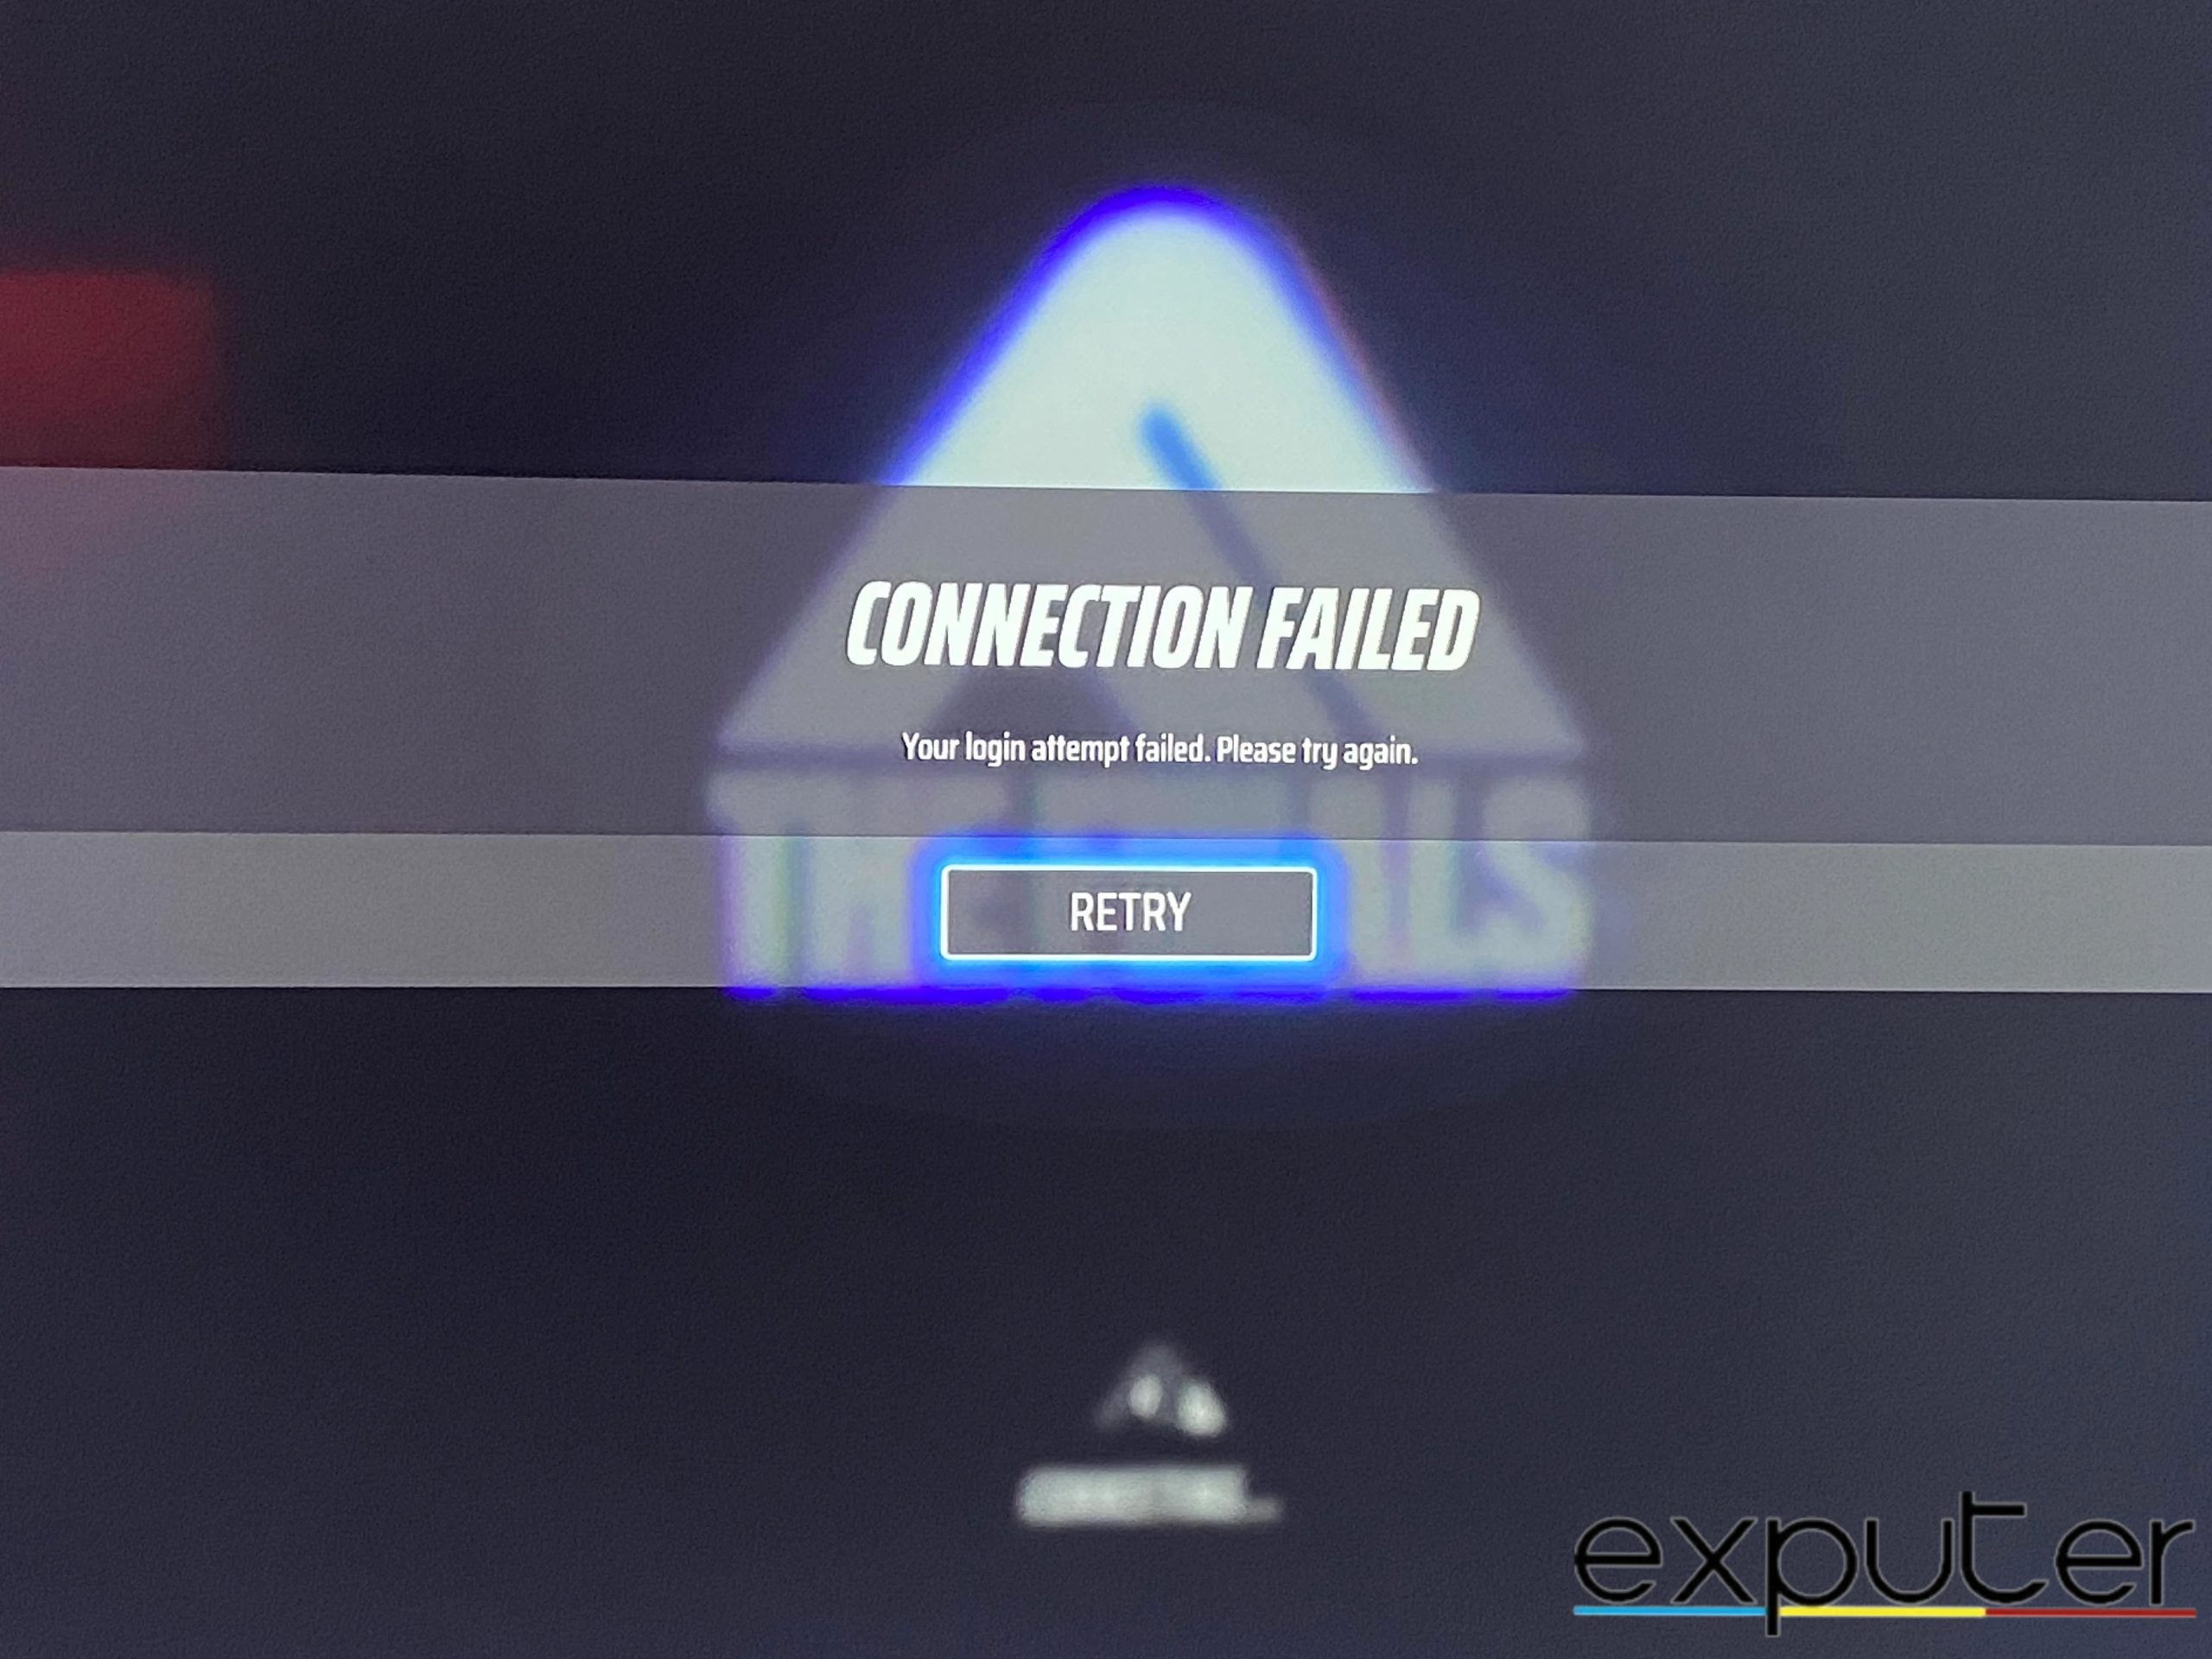 The Connection Failed error screen on the PS5 for The Finals